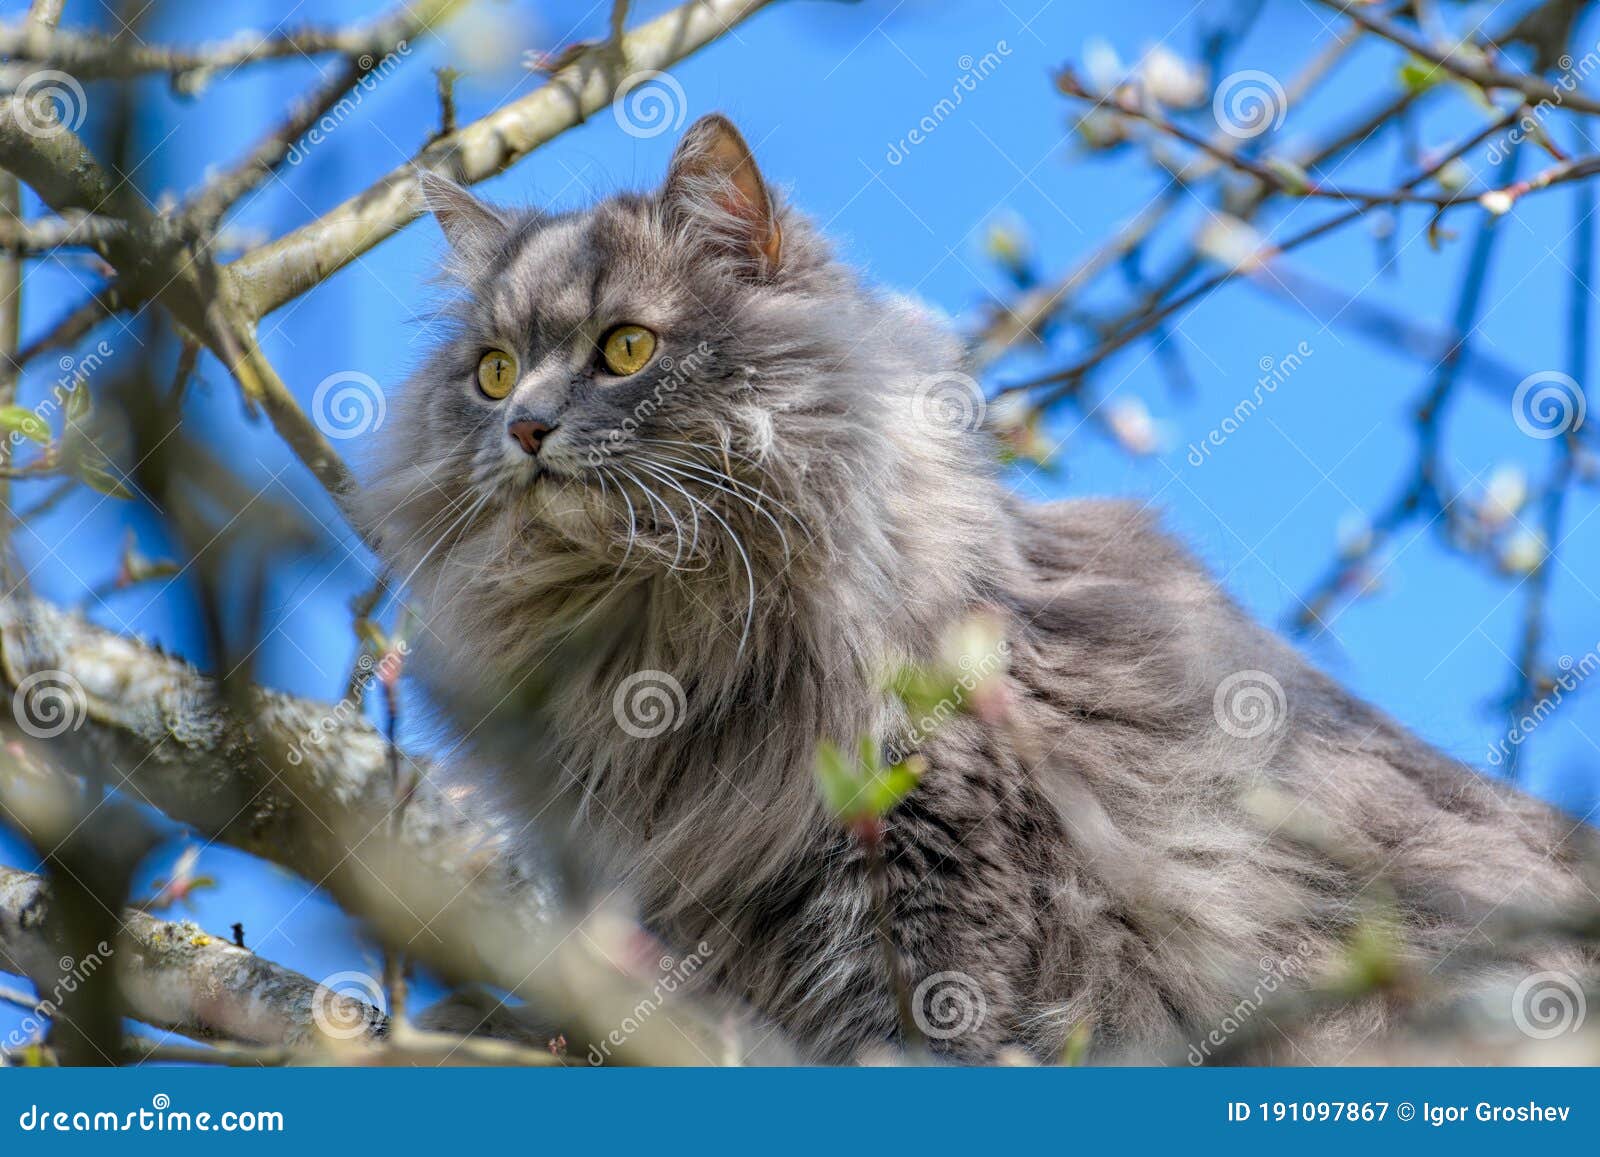 A Fluffy Long-haired, Smoky-grey Cat with Yellow Eyes Walks in the Branches  of Trees Stock Image - Image of kitten, healthy: 191097867